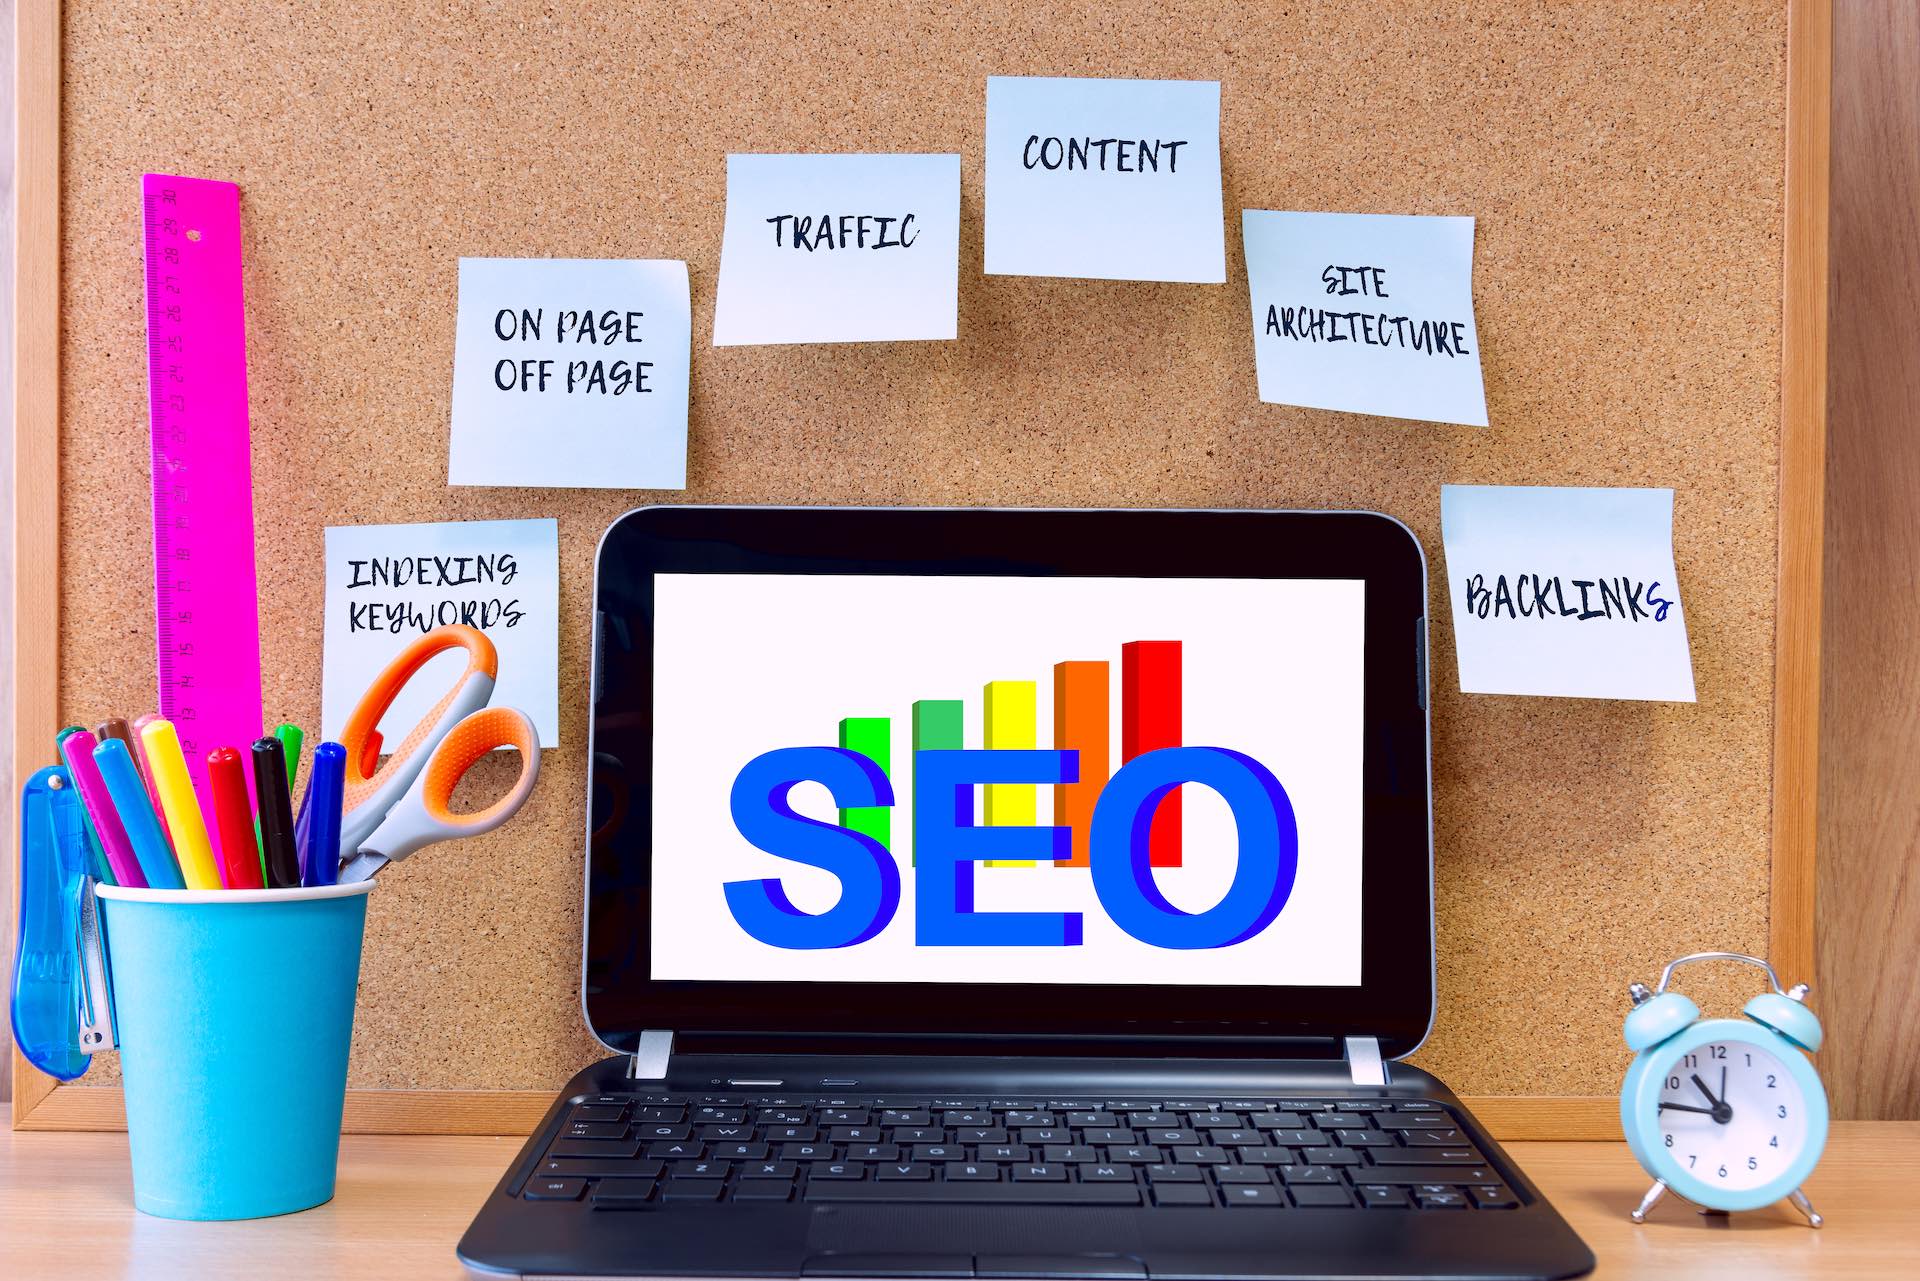 5 tips to improve SEO content and better your Google rank.